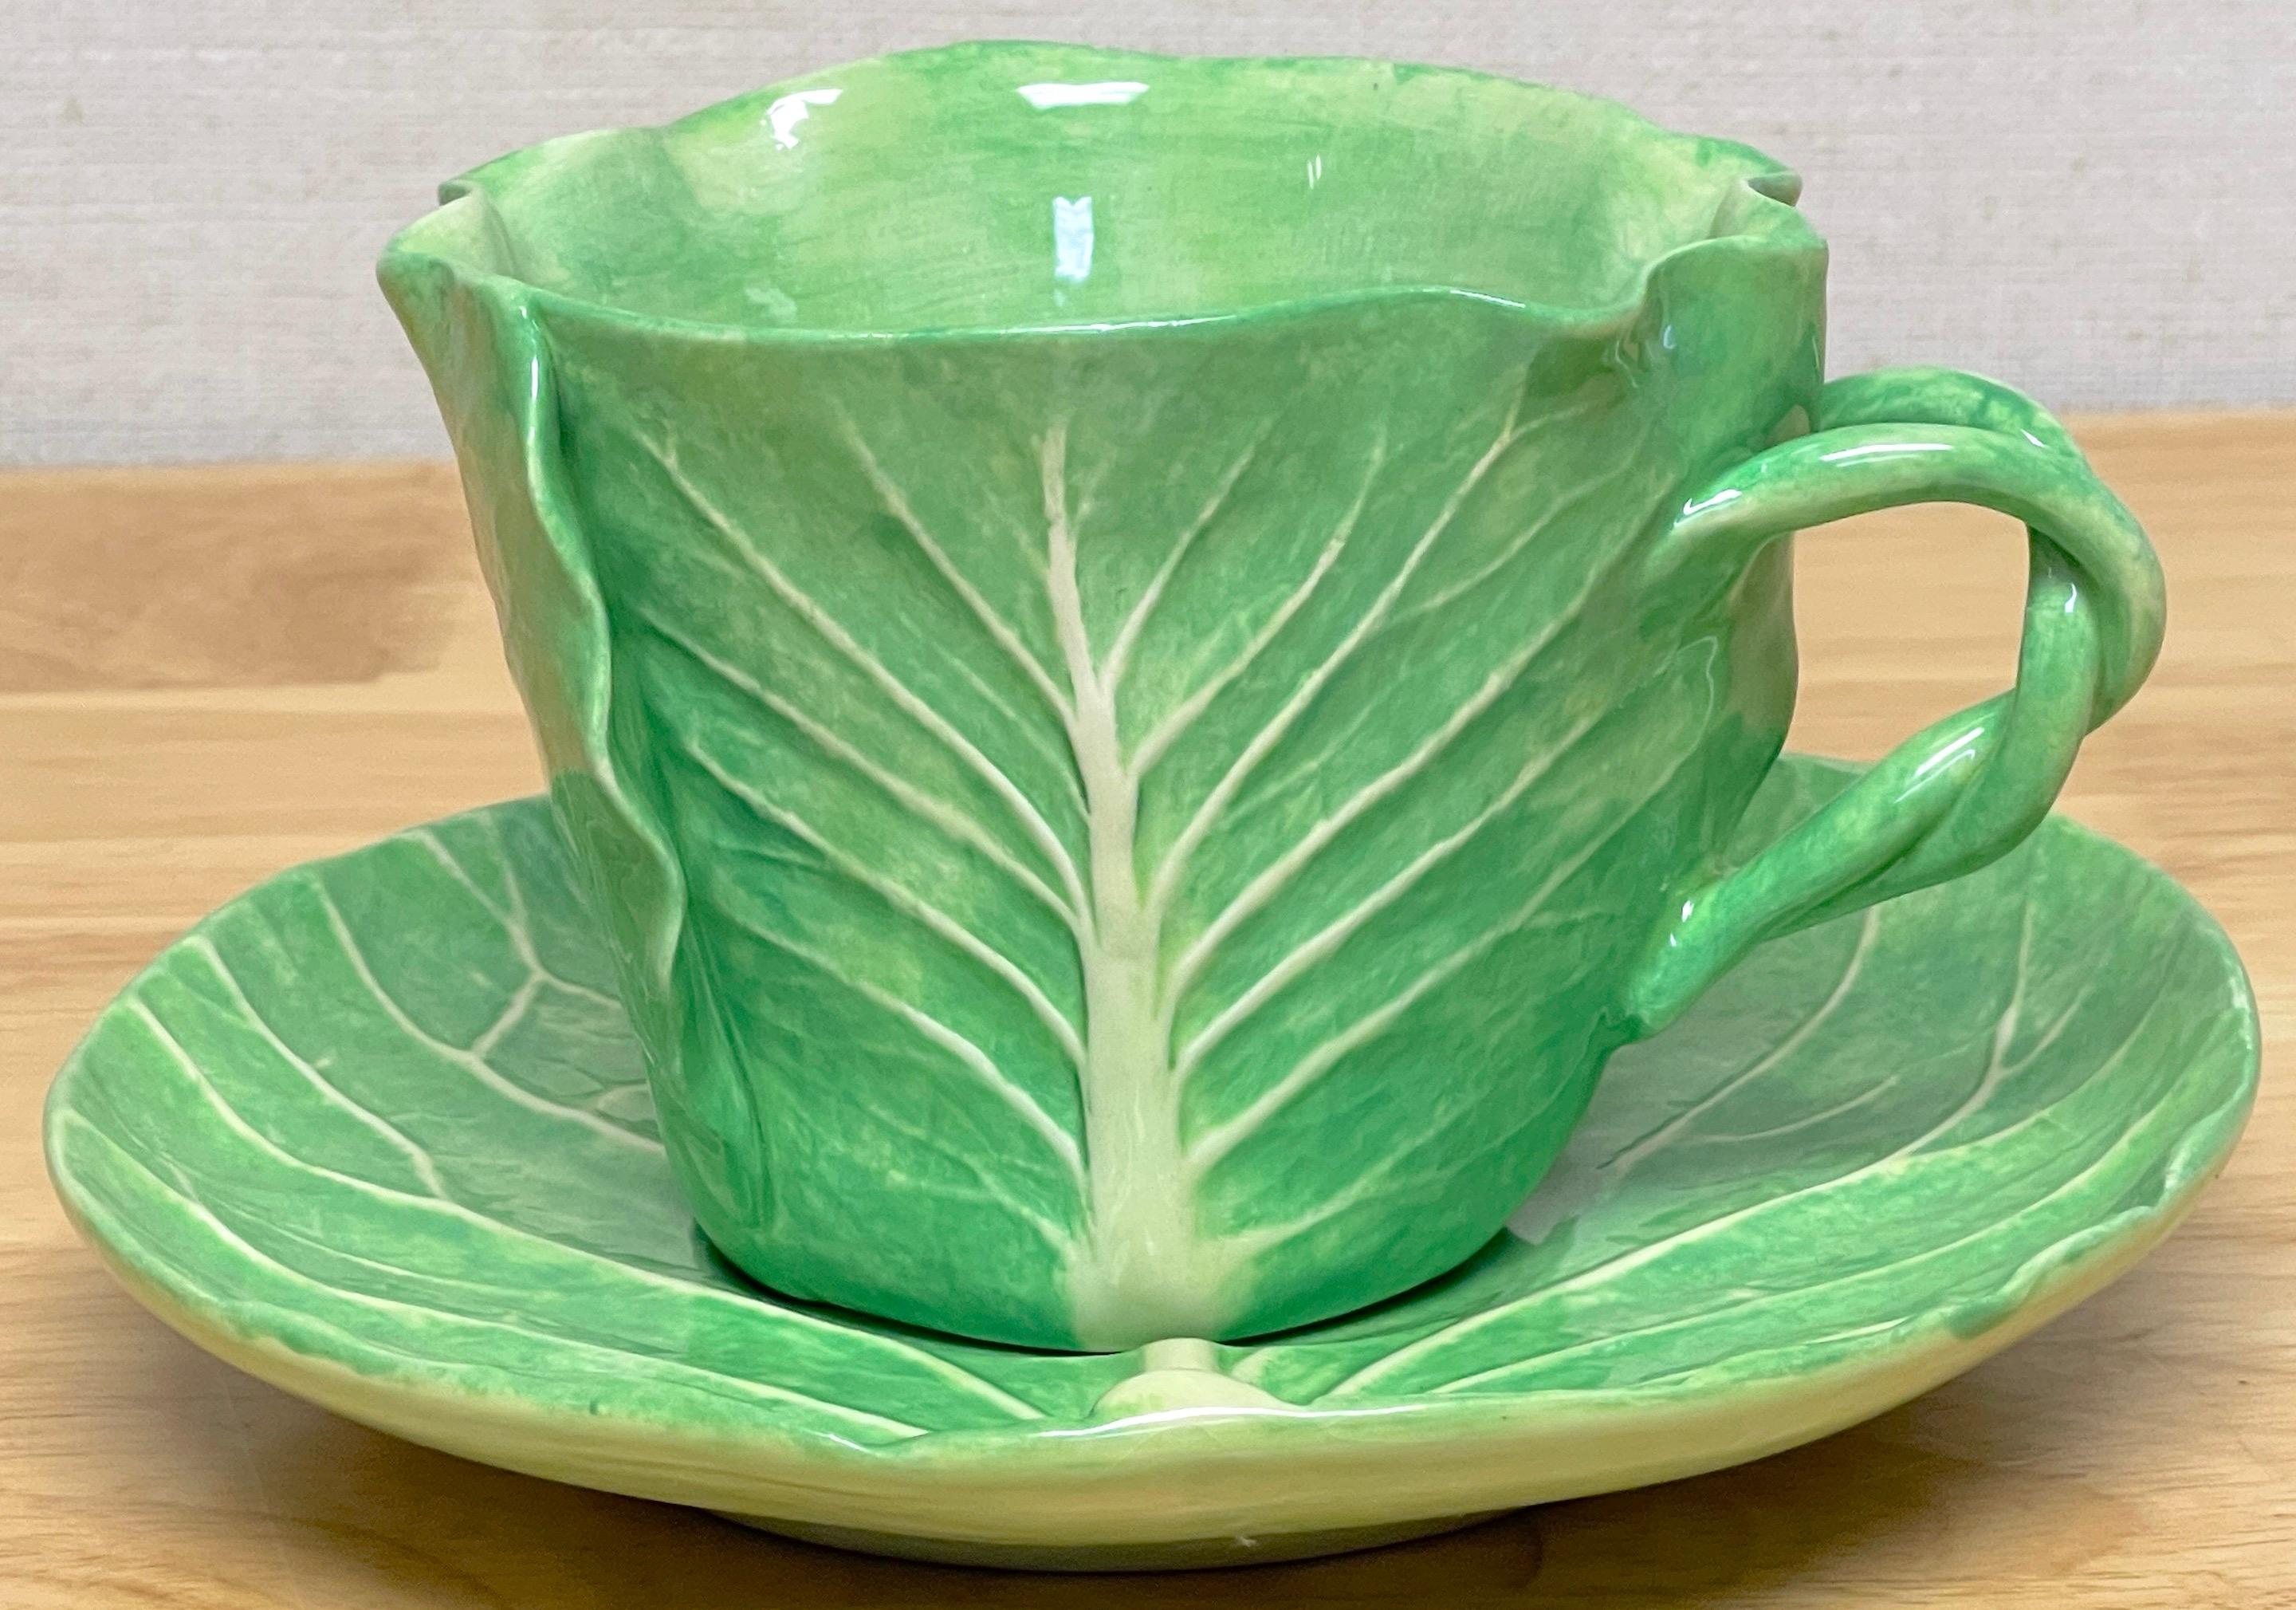 Dodie Thayer 'Jumbo' Lettuce Leaf Cup & Saucer, 5 Available, Sold Individually 1